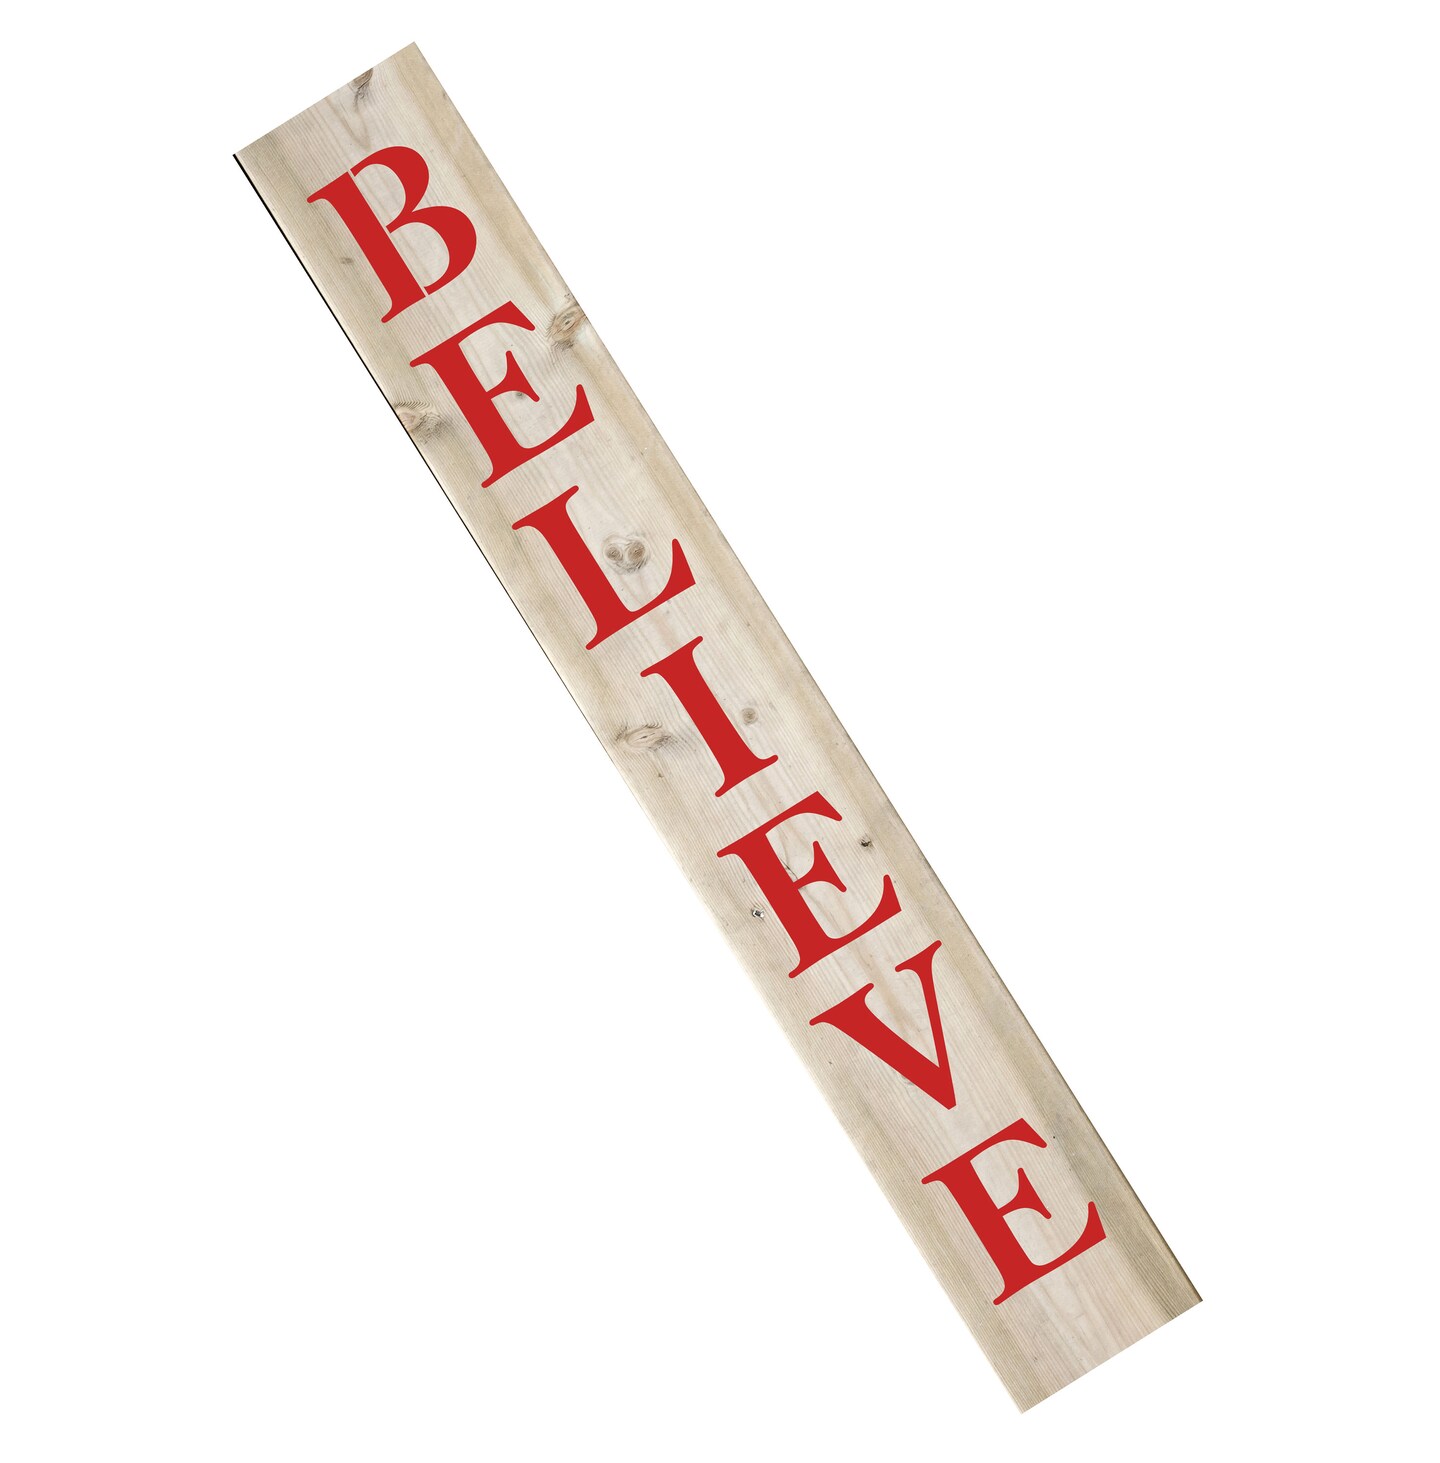 60-Inch Believe Tall Wall Stencil | 3807L by Designer Stencils | Word &#x26; Phrase Stencils | Reusable Art Craft Stencils for Painting on Walls, Canvas, Wood | Reusable Plastic Paint Stencil for Home Makeover | Easy to Use &#x26; Clean Art Stencil